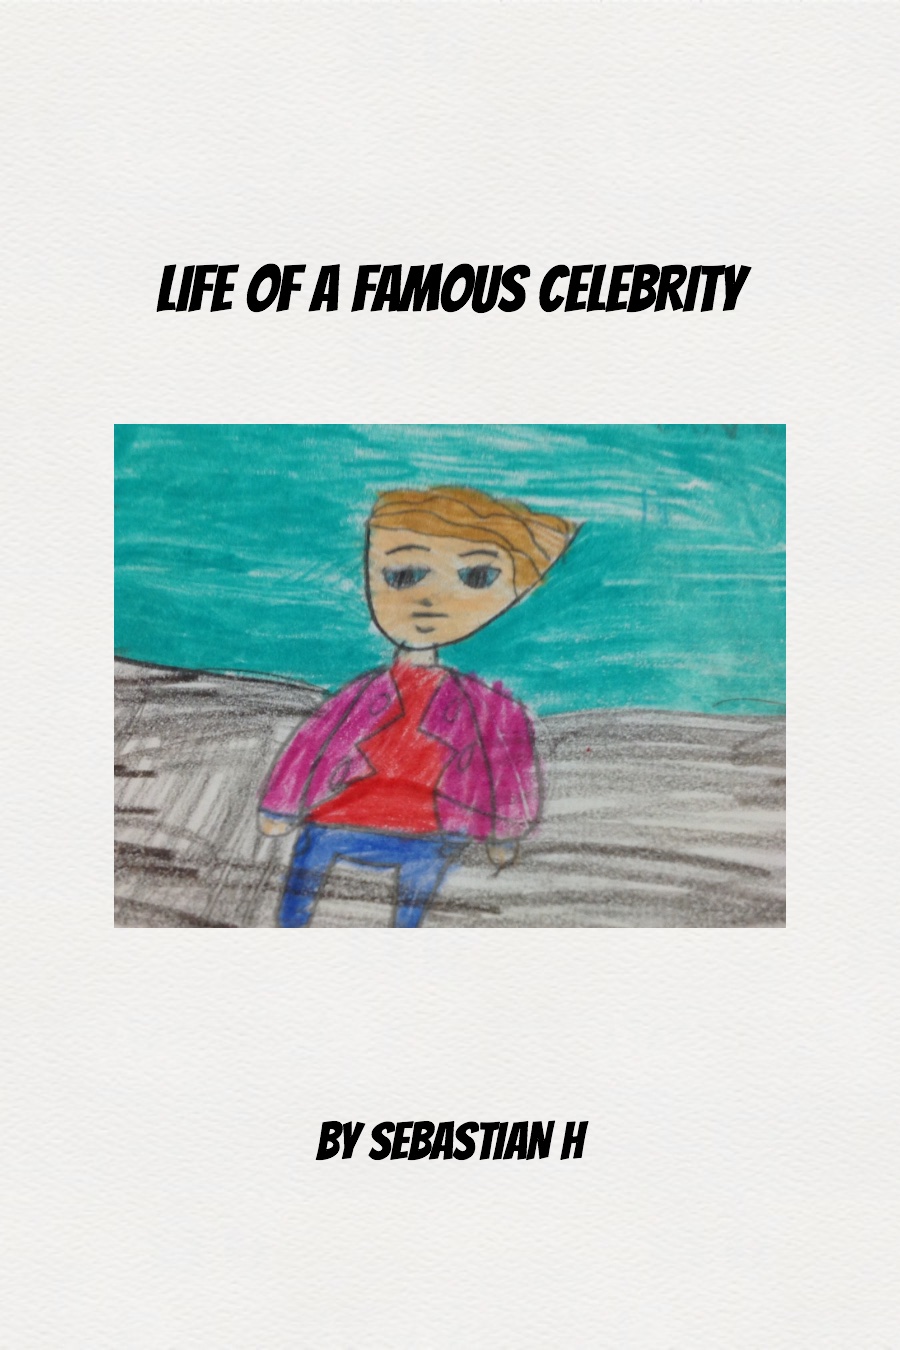 Life of a Famous Celebrity by Sebastian H